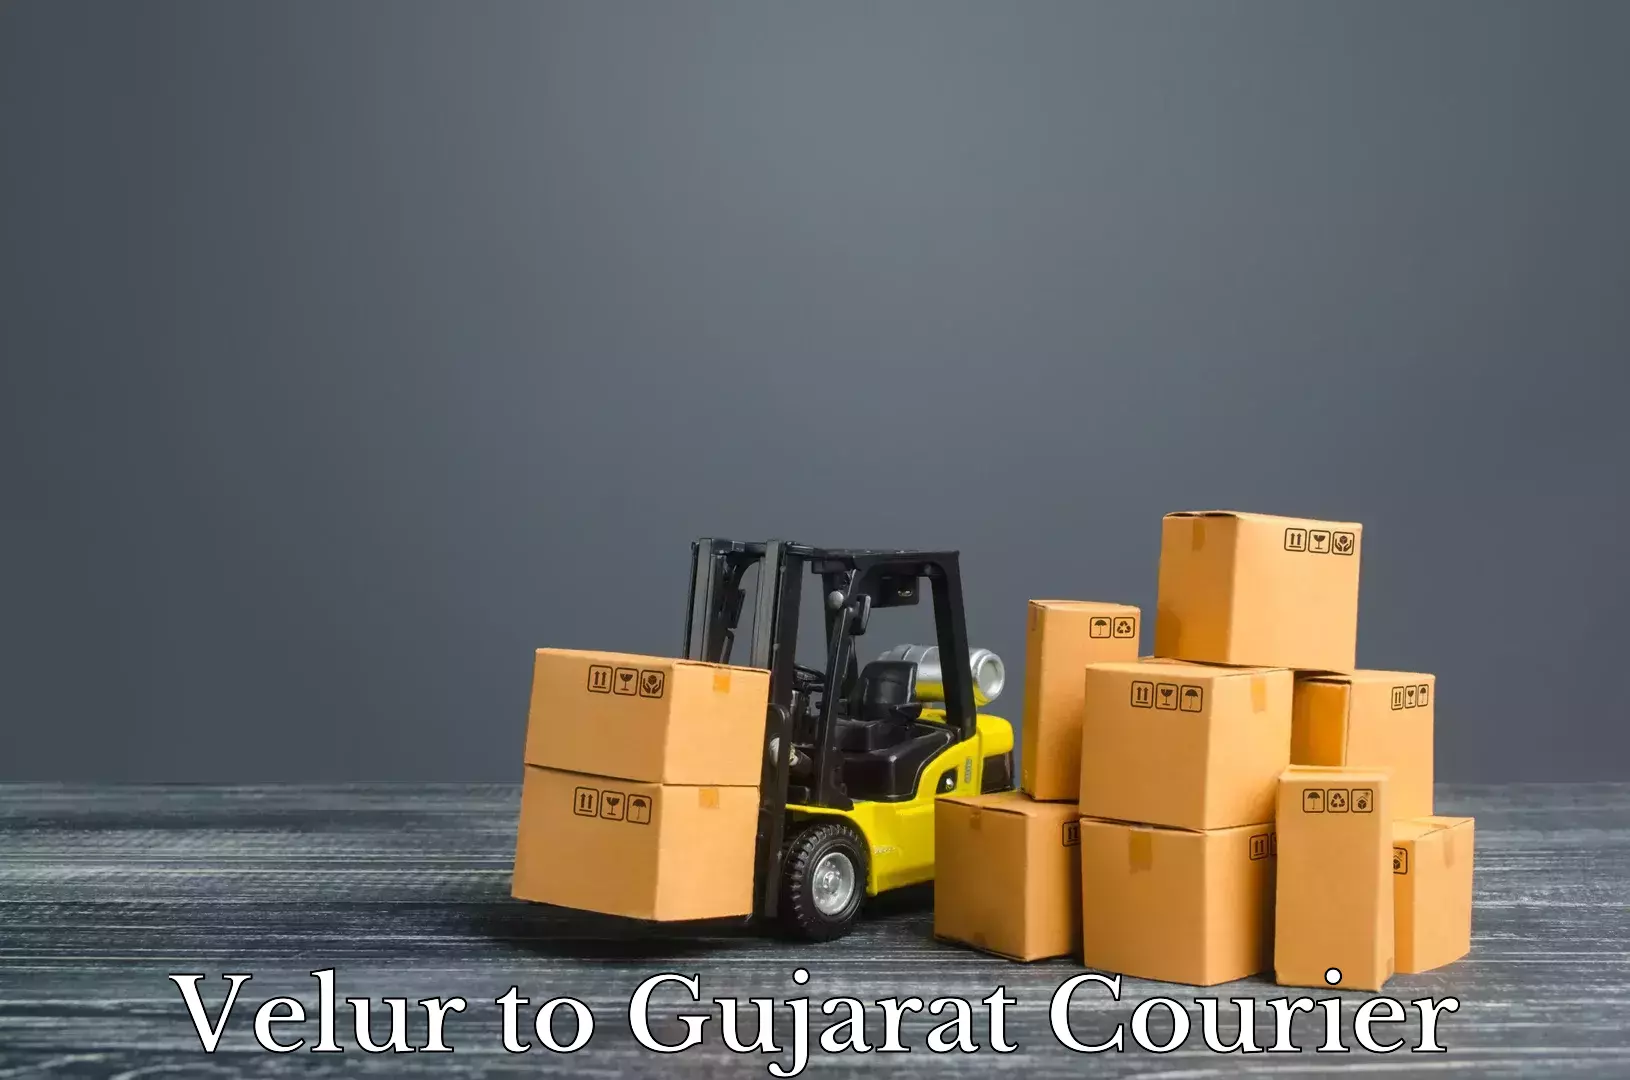 Luggage delivery system Velur to Gujarat